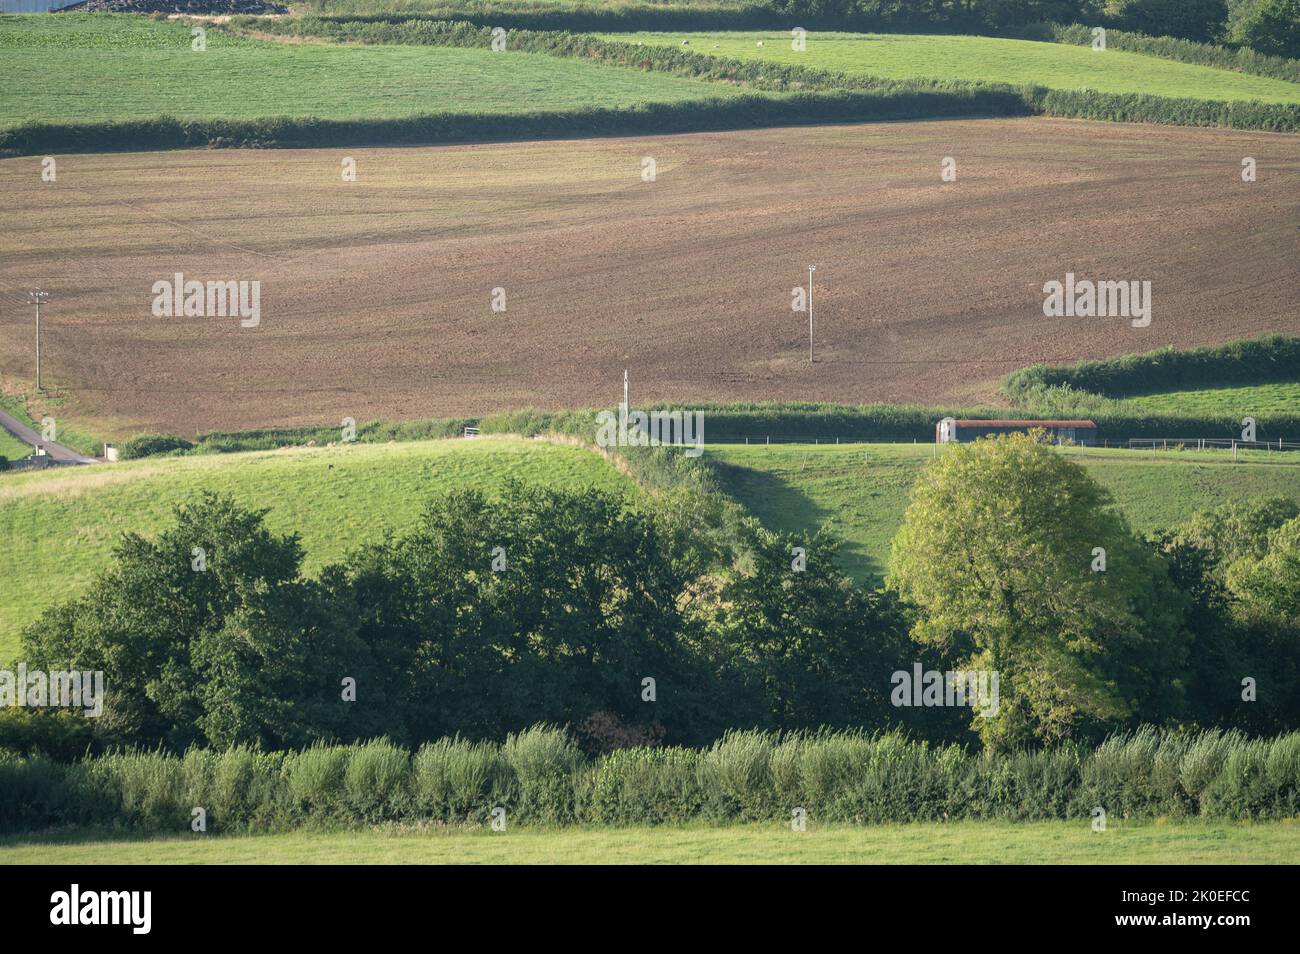 Thick apllication of farmyard manure on field prior to ploughing, Carmaqrthenshire, Wales, UK Stock Photo